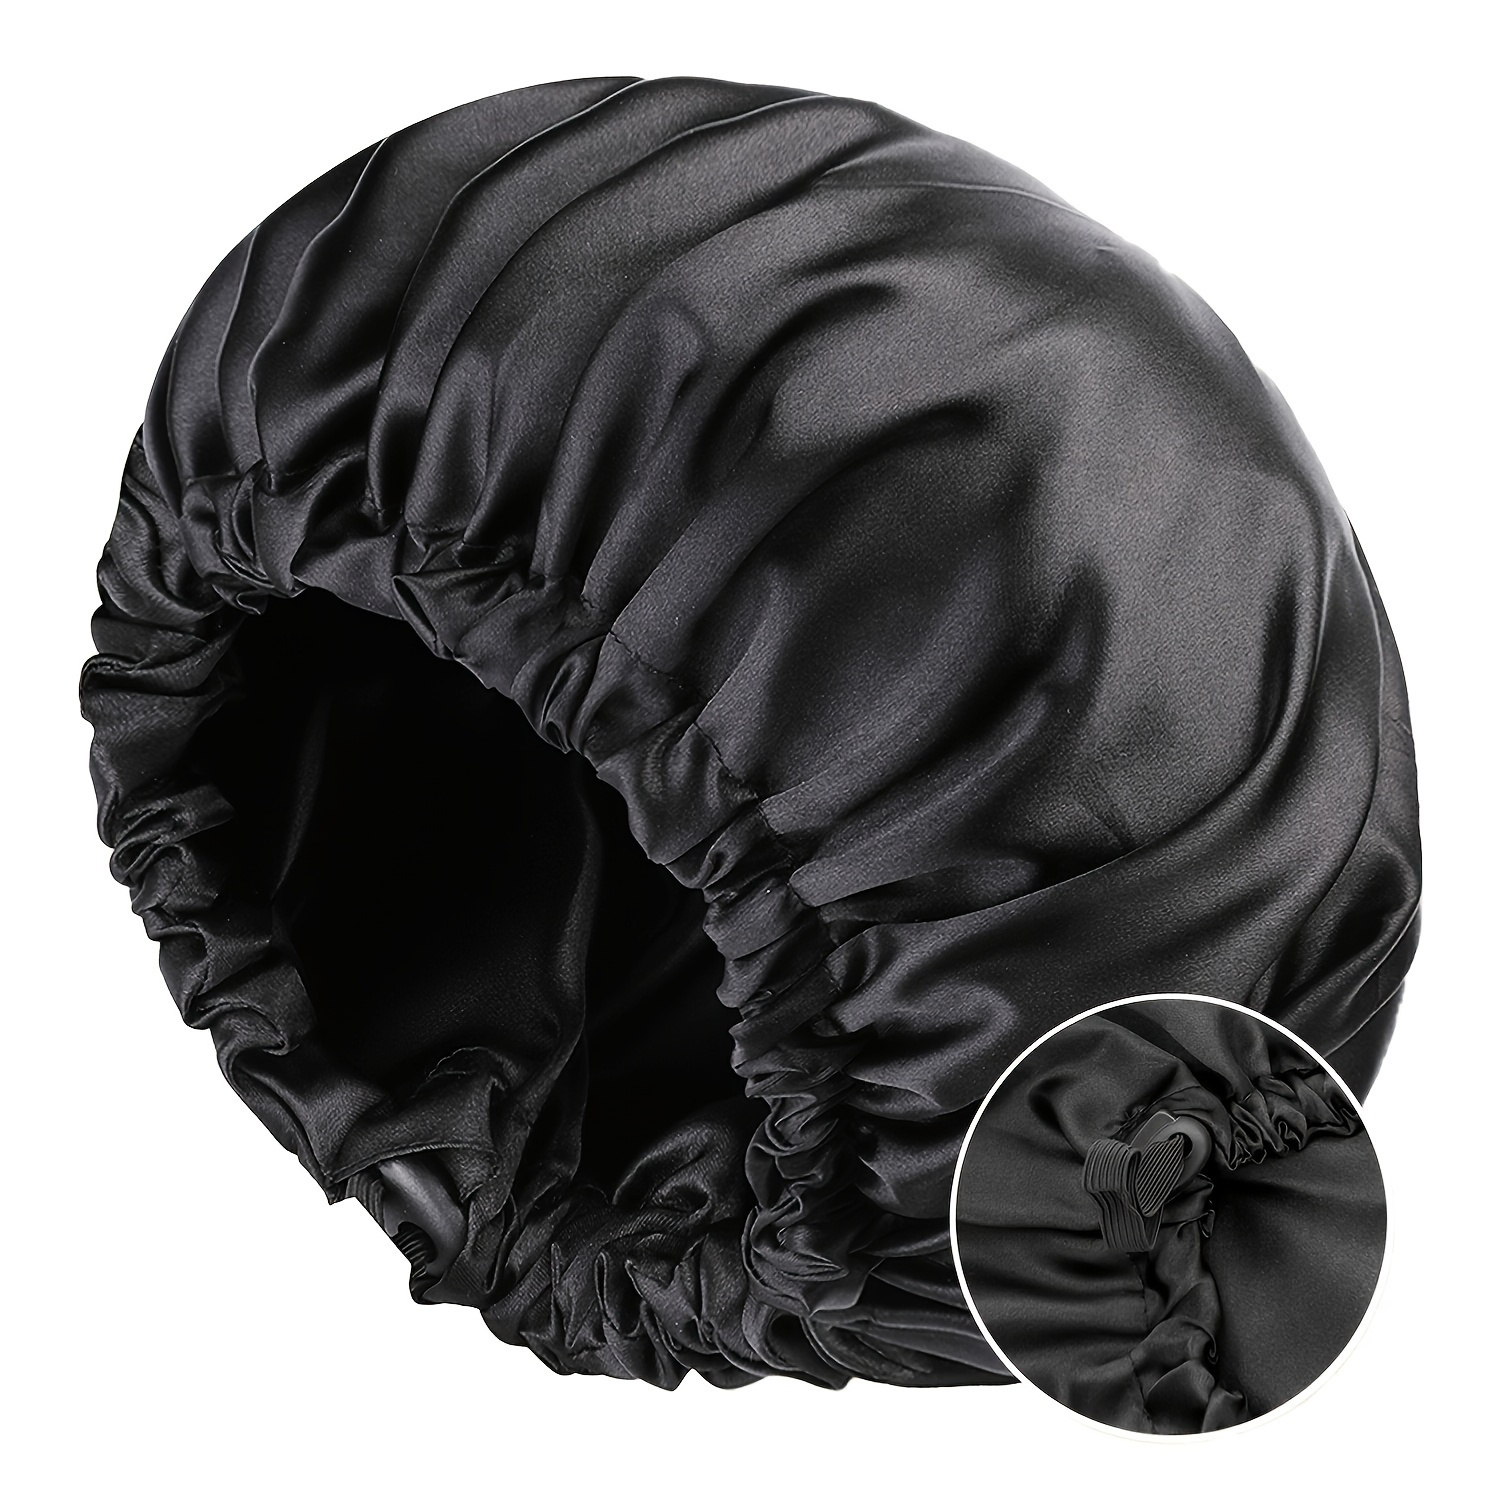 

Satin Bonnet For Sleeping Adjustable Silk Bonnet For Curly Hair Bonnets Double Layer Large Satin Lined Sleep For Women